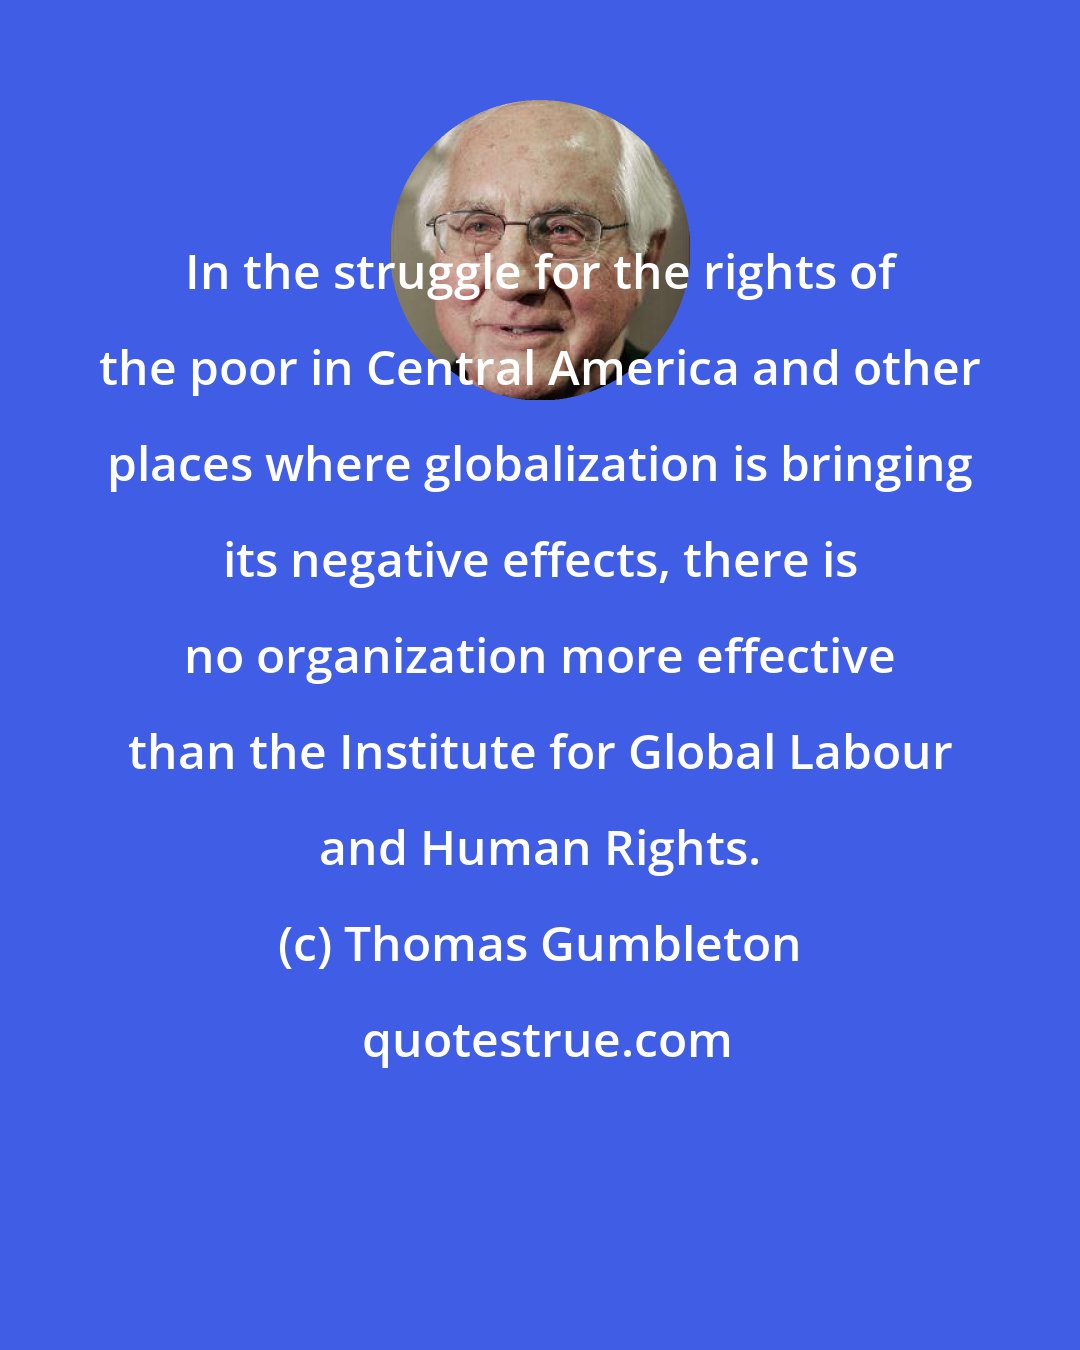 Thomas Gumbleton: In the struggle for the rights of the poor in Central America and other places where globalization is bringing its negative effects, there is no organization more effective than the Institute for Global Labour and Human Rights.